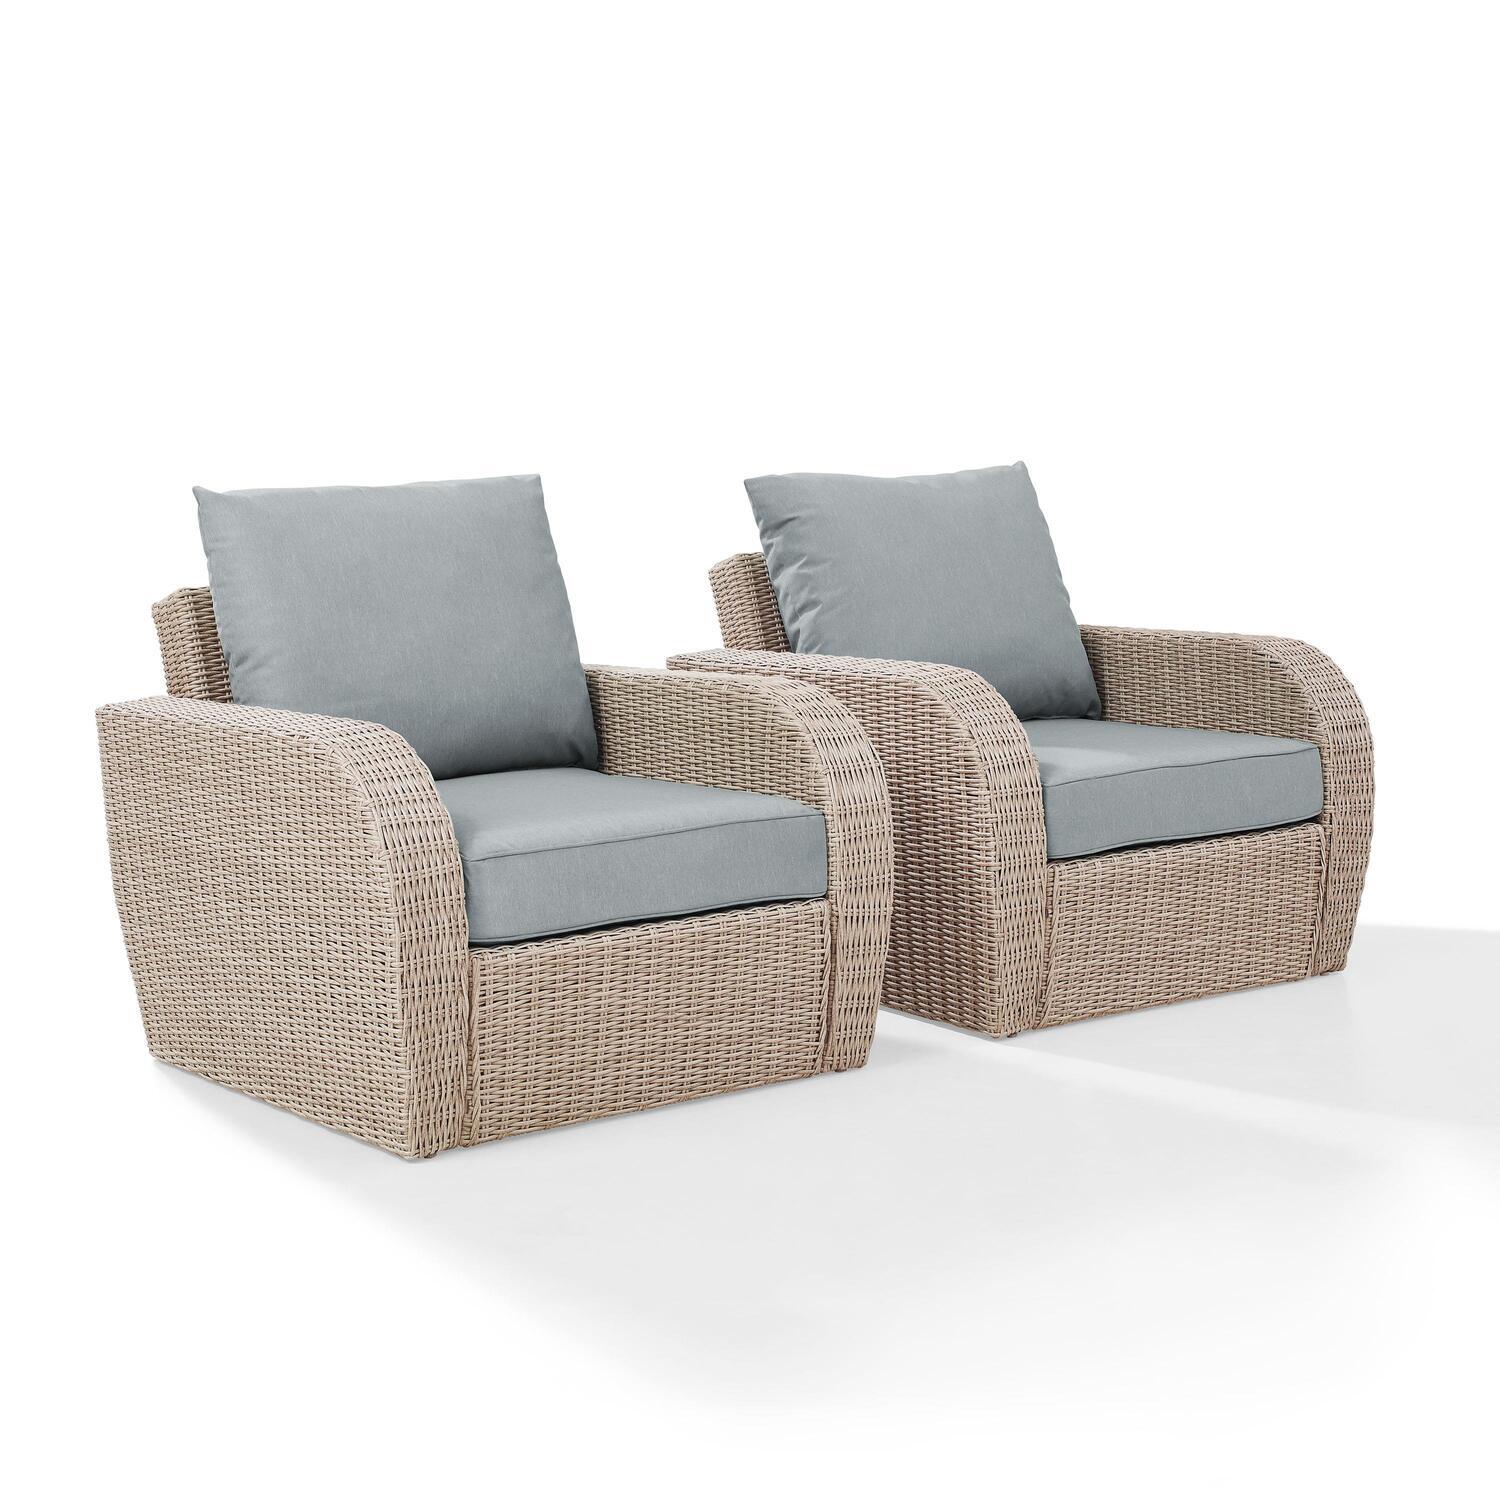 Crosley Furniture St Augustine 2 Pc Outdoor Wicker Seating Set With Mist Cushion - Two Outdoor Wicker Chairs - image 1 of 11